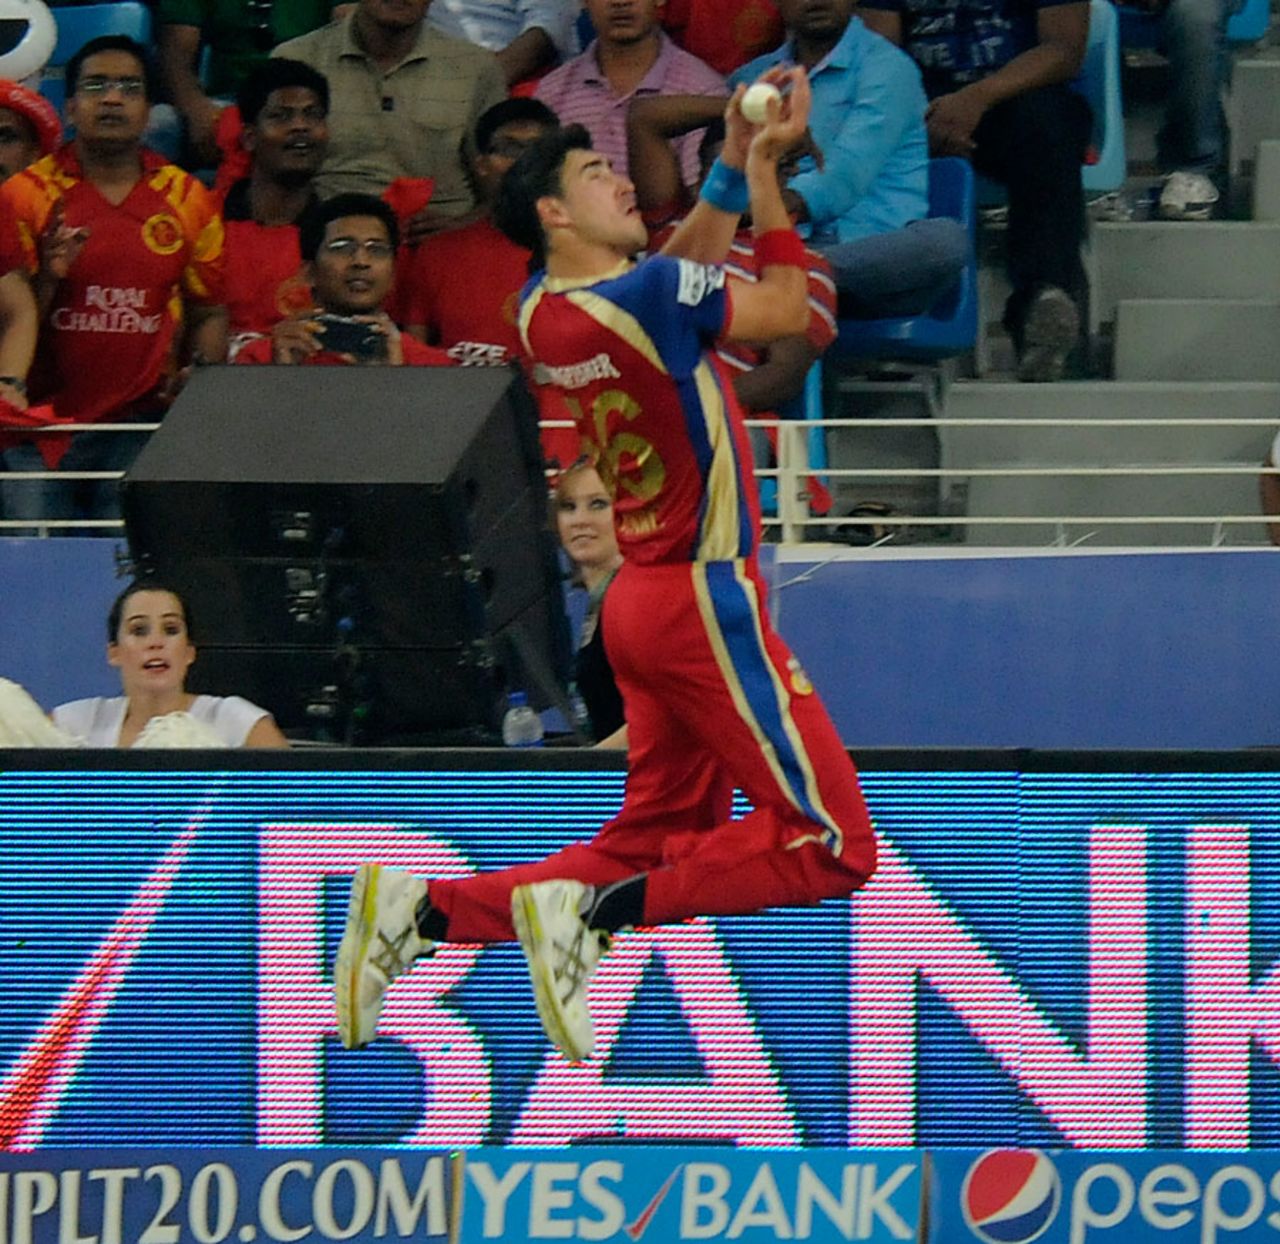 Mitchell Starc takes the first of two amazing catches, Kings XI Punjab v Royal Challengers Bangalore, IPL 2014, Dubai, April 28, 2014